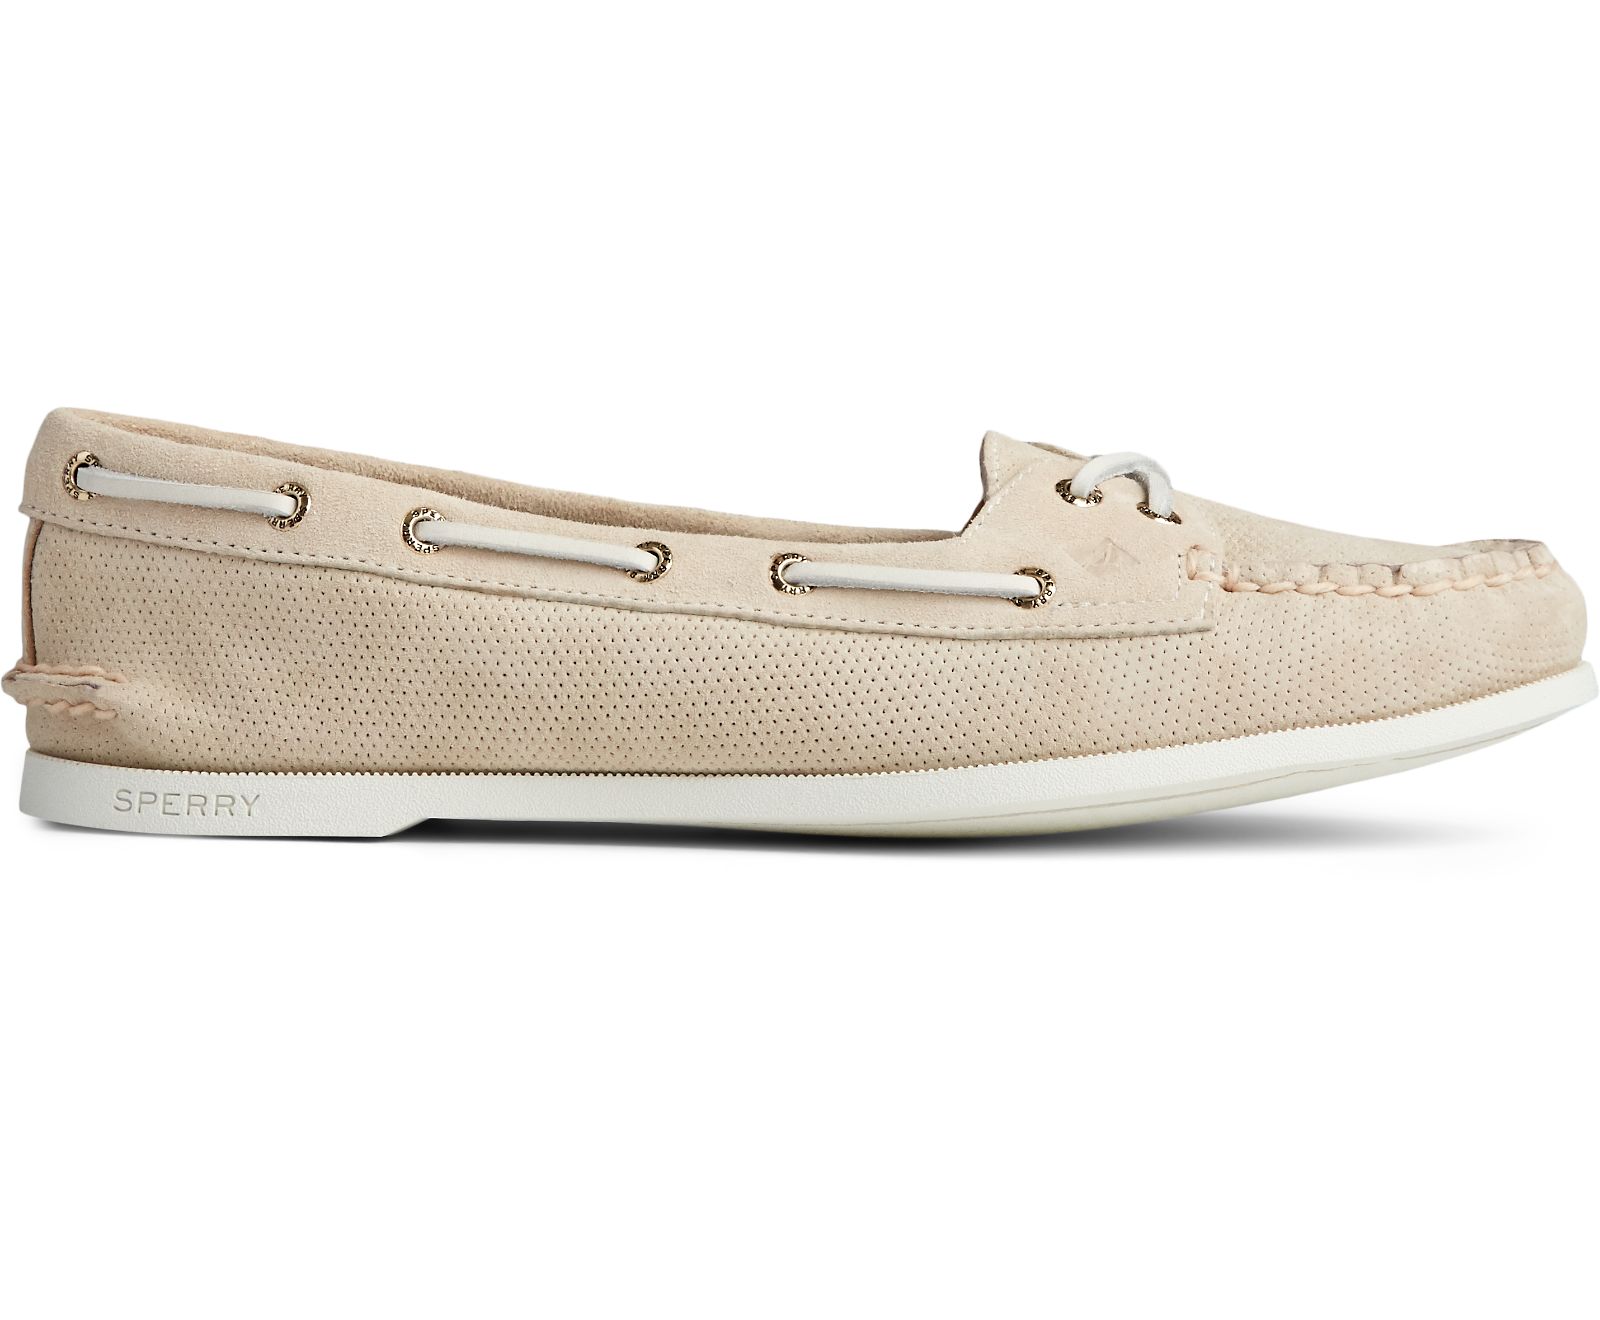 Women's Authentic Original Skimmer Pin Perforated Boat Shoe - Ivory